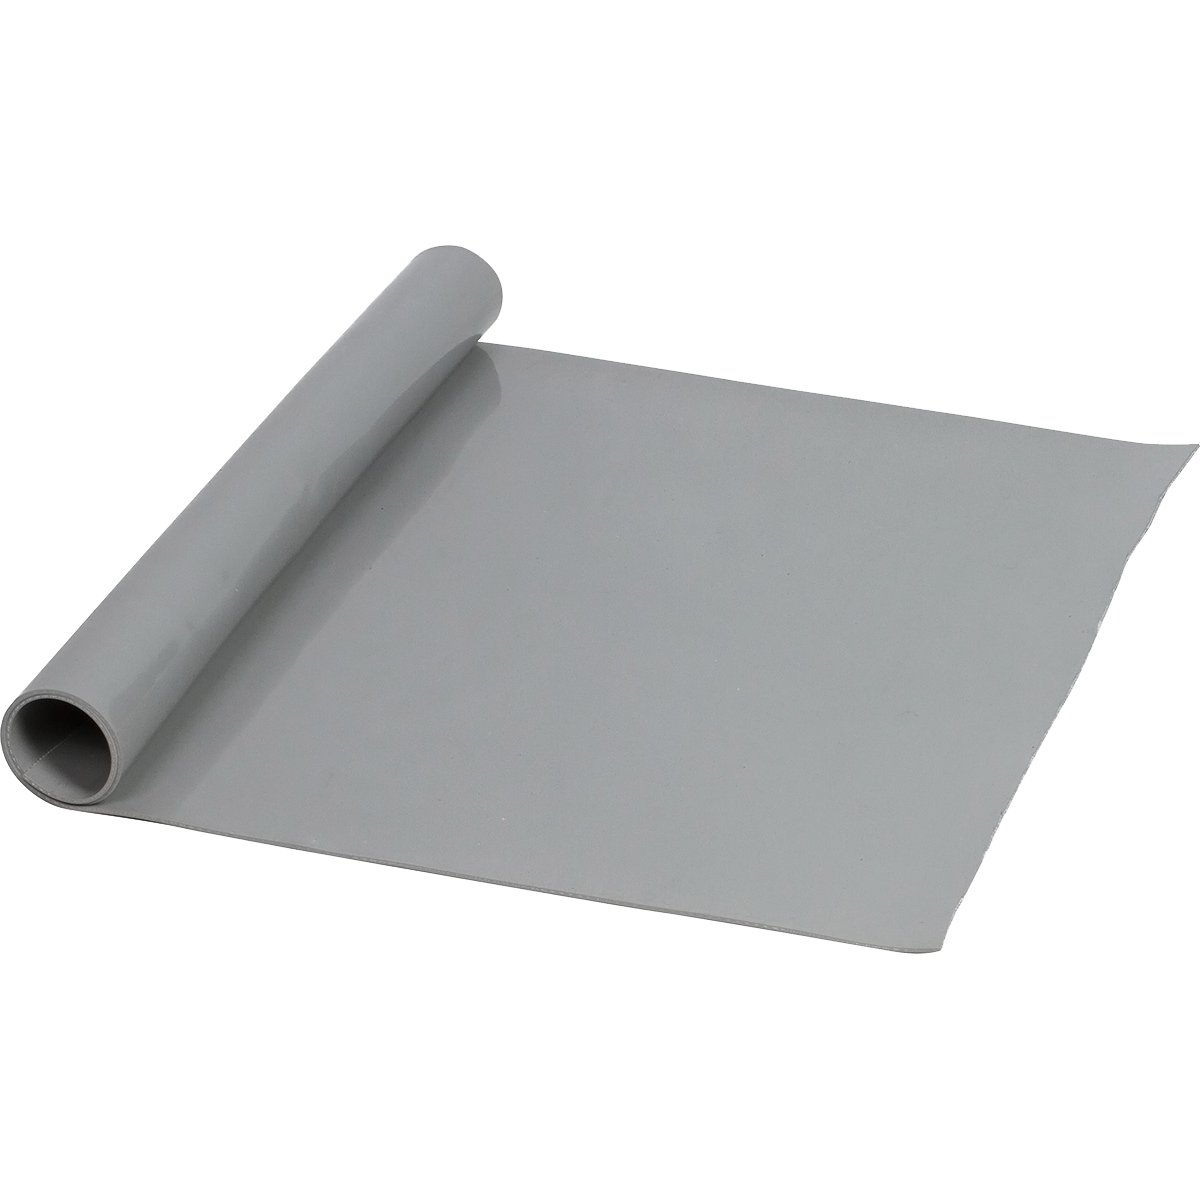 Silicone Sheet 24in x 10ft Roll - Midsun Group